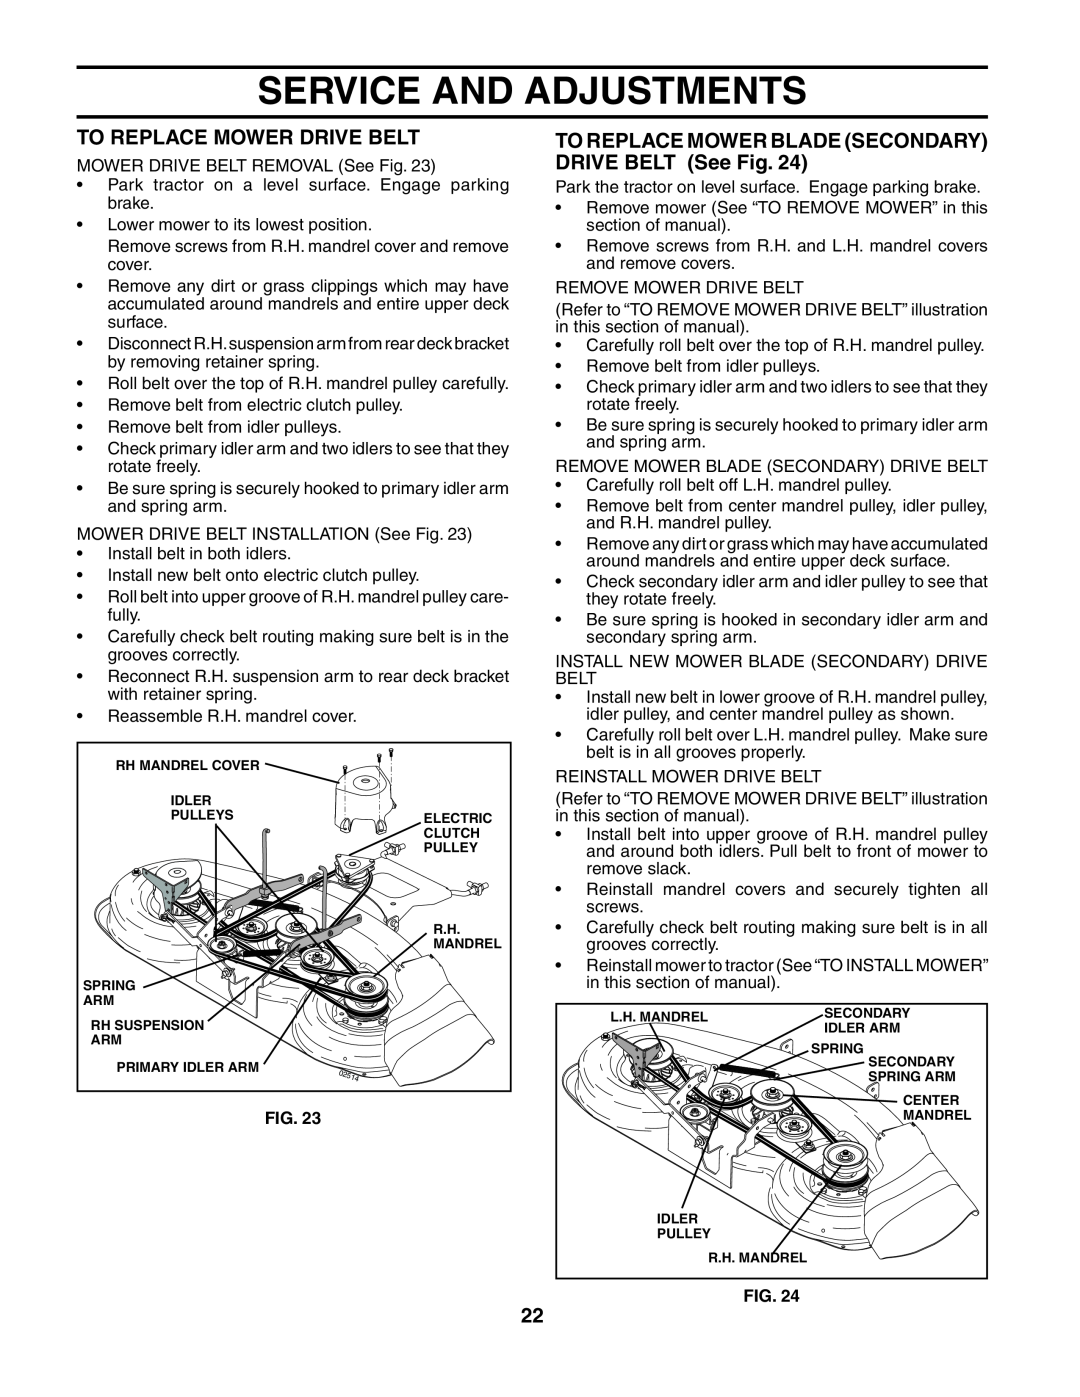 Husqvarna YTH2248 owner manual To Replace Mower Drive Belt, TO REPLACE MOWER BLADE SECONDARY DRIVE BELT See Fig 